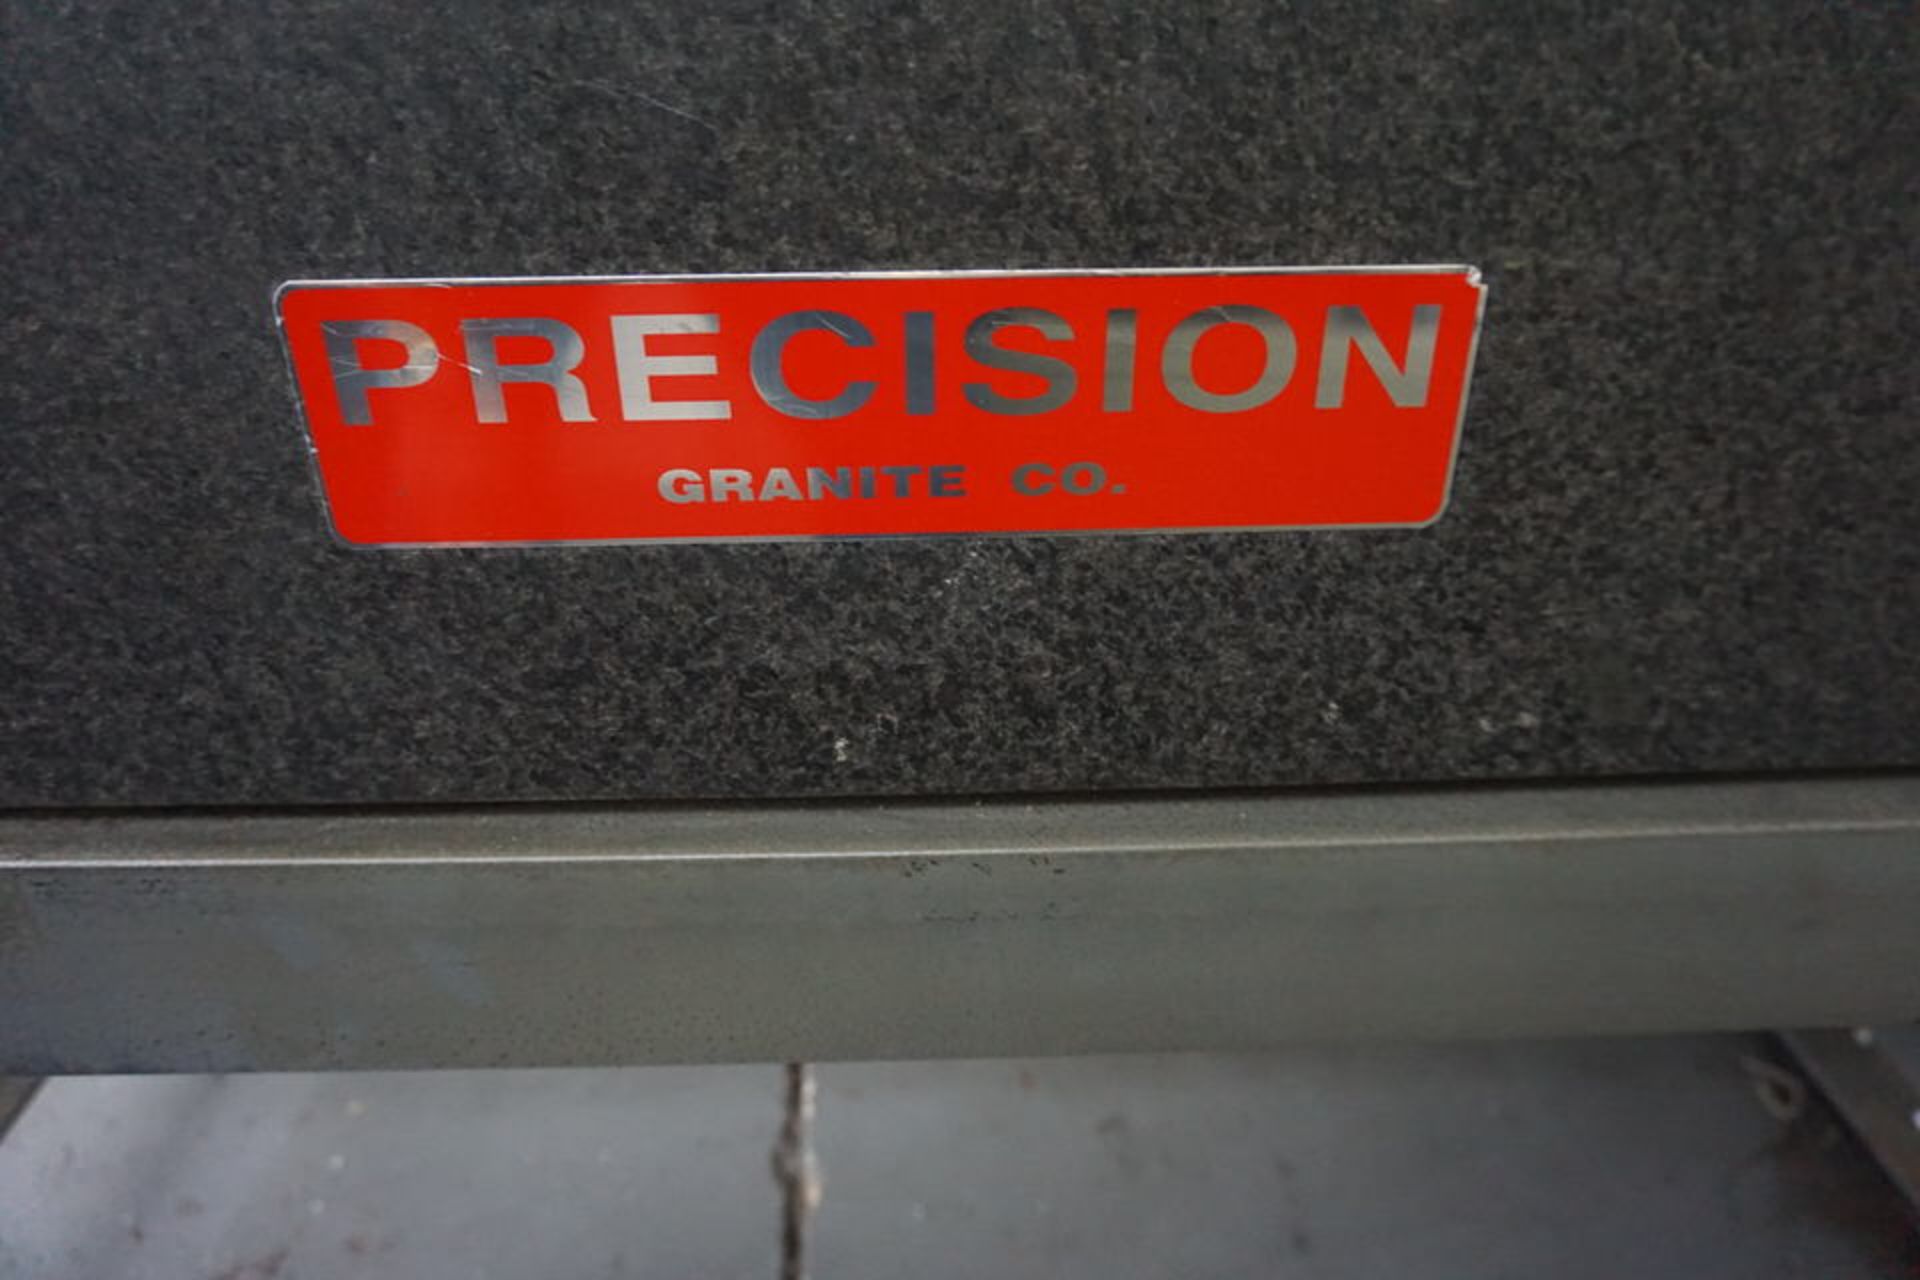 PRECISION BLOCK GRANITE SURFACE PLATE, 8" THICK X 36" X 60" W/ STAND ON CASTERS, NO CONTENTS - Image 3 of 3